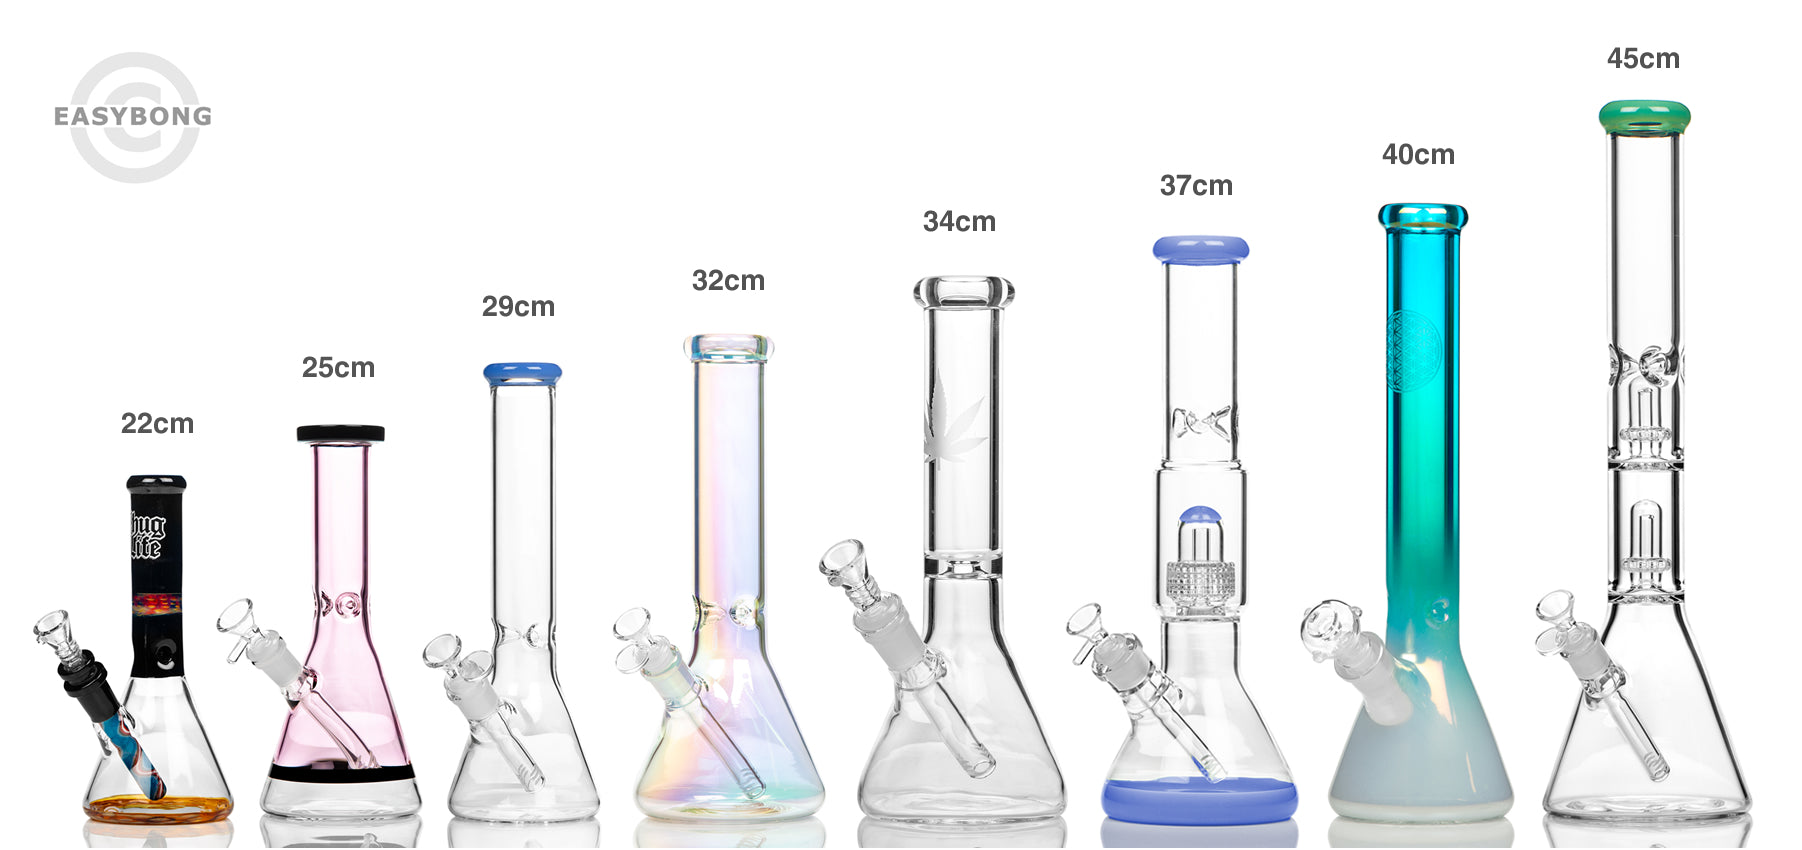 Small to large size glass beaker bongs in comparison.